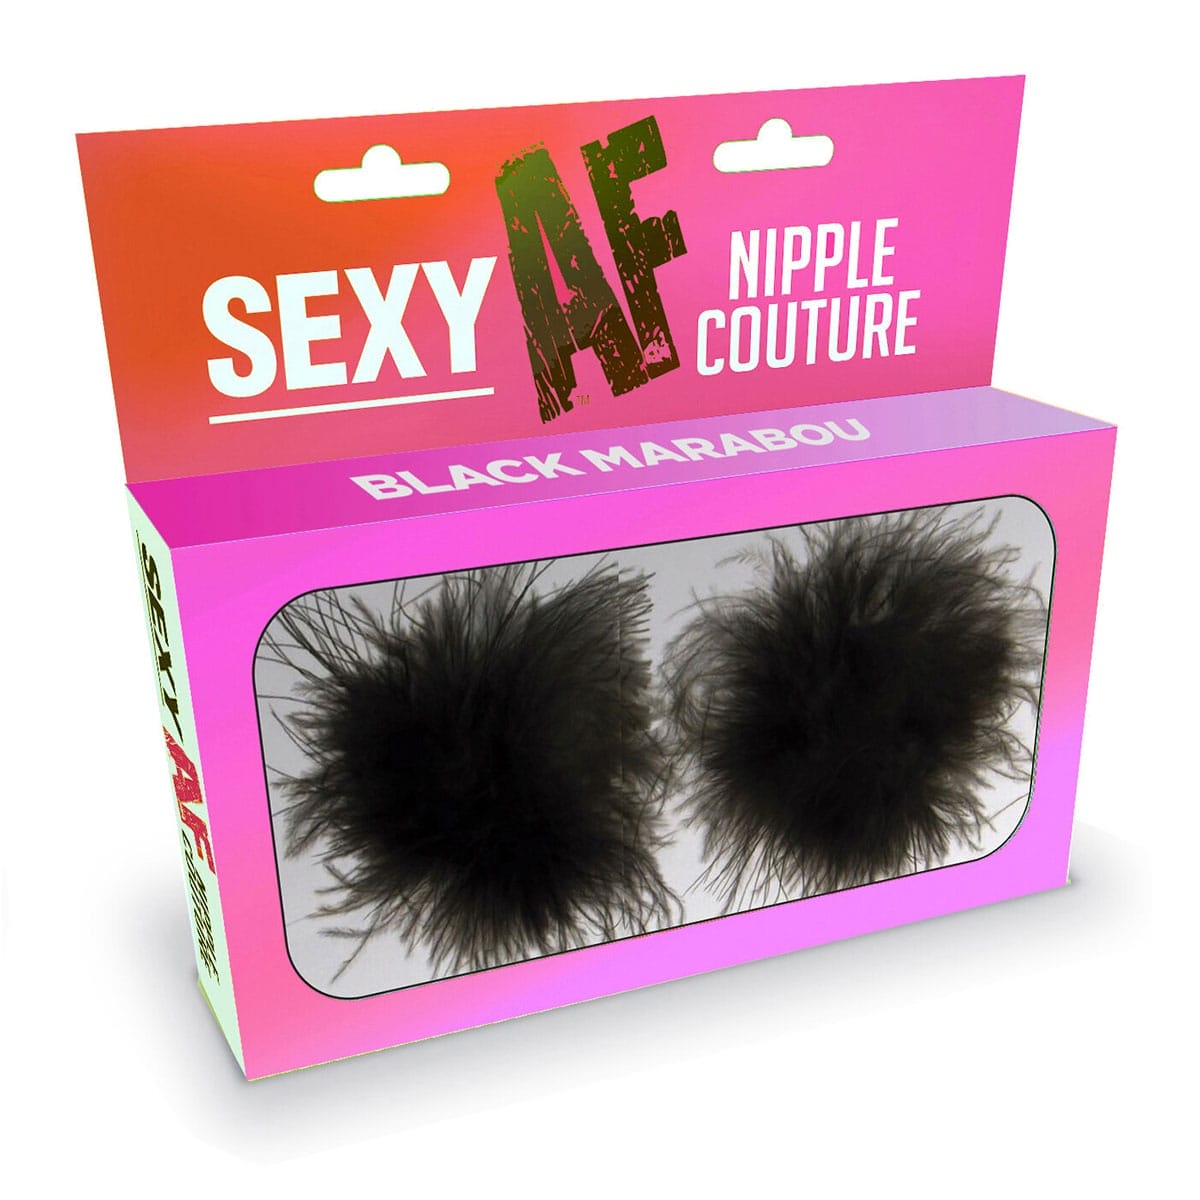 Wear Sexy AF Nipple Couture - Black Marabou nipple covers.